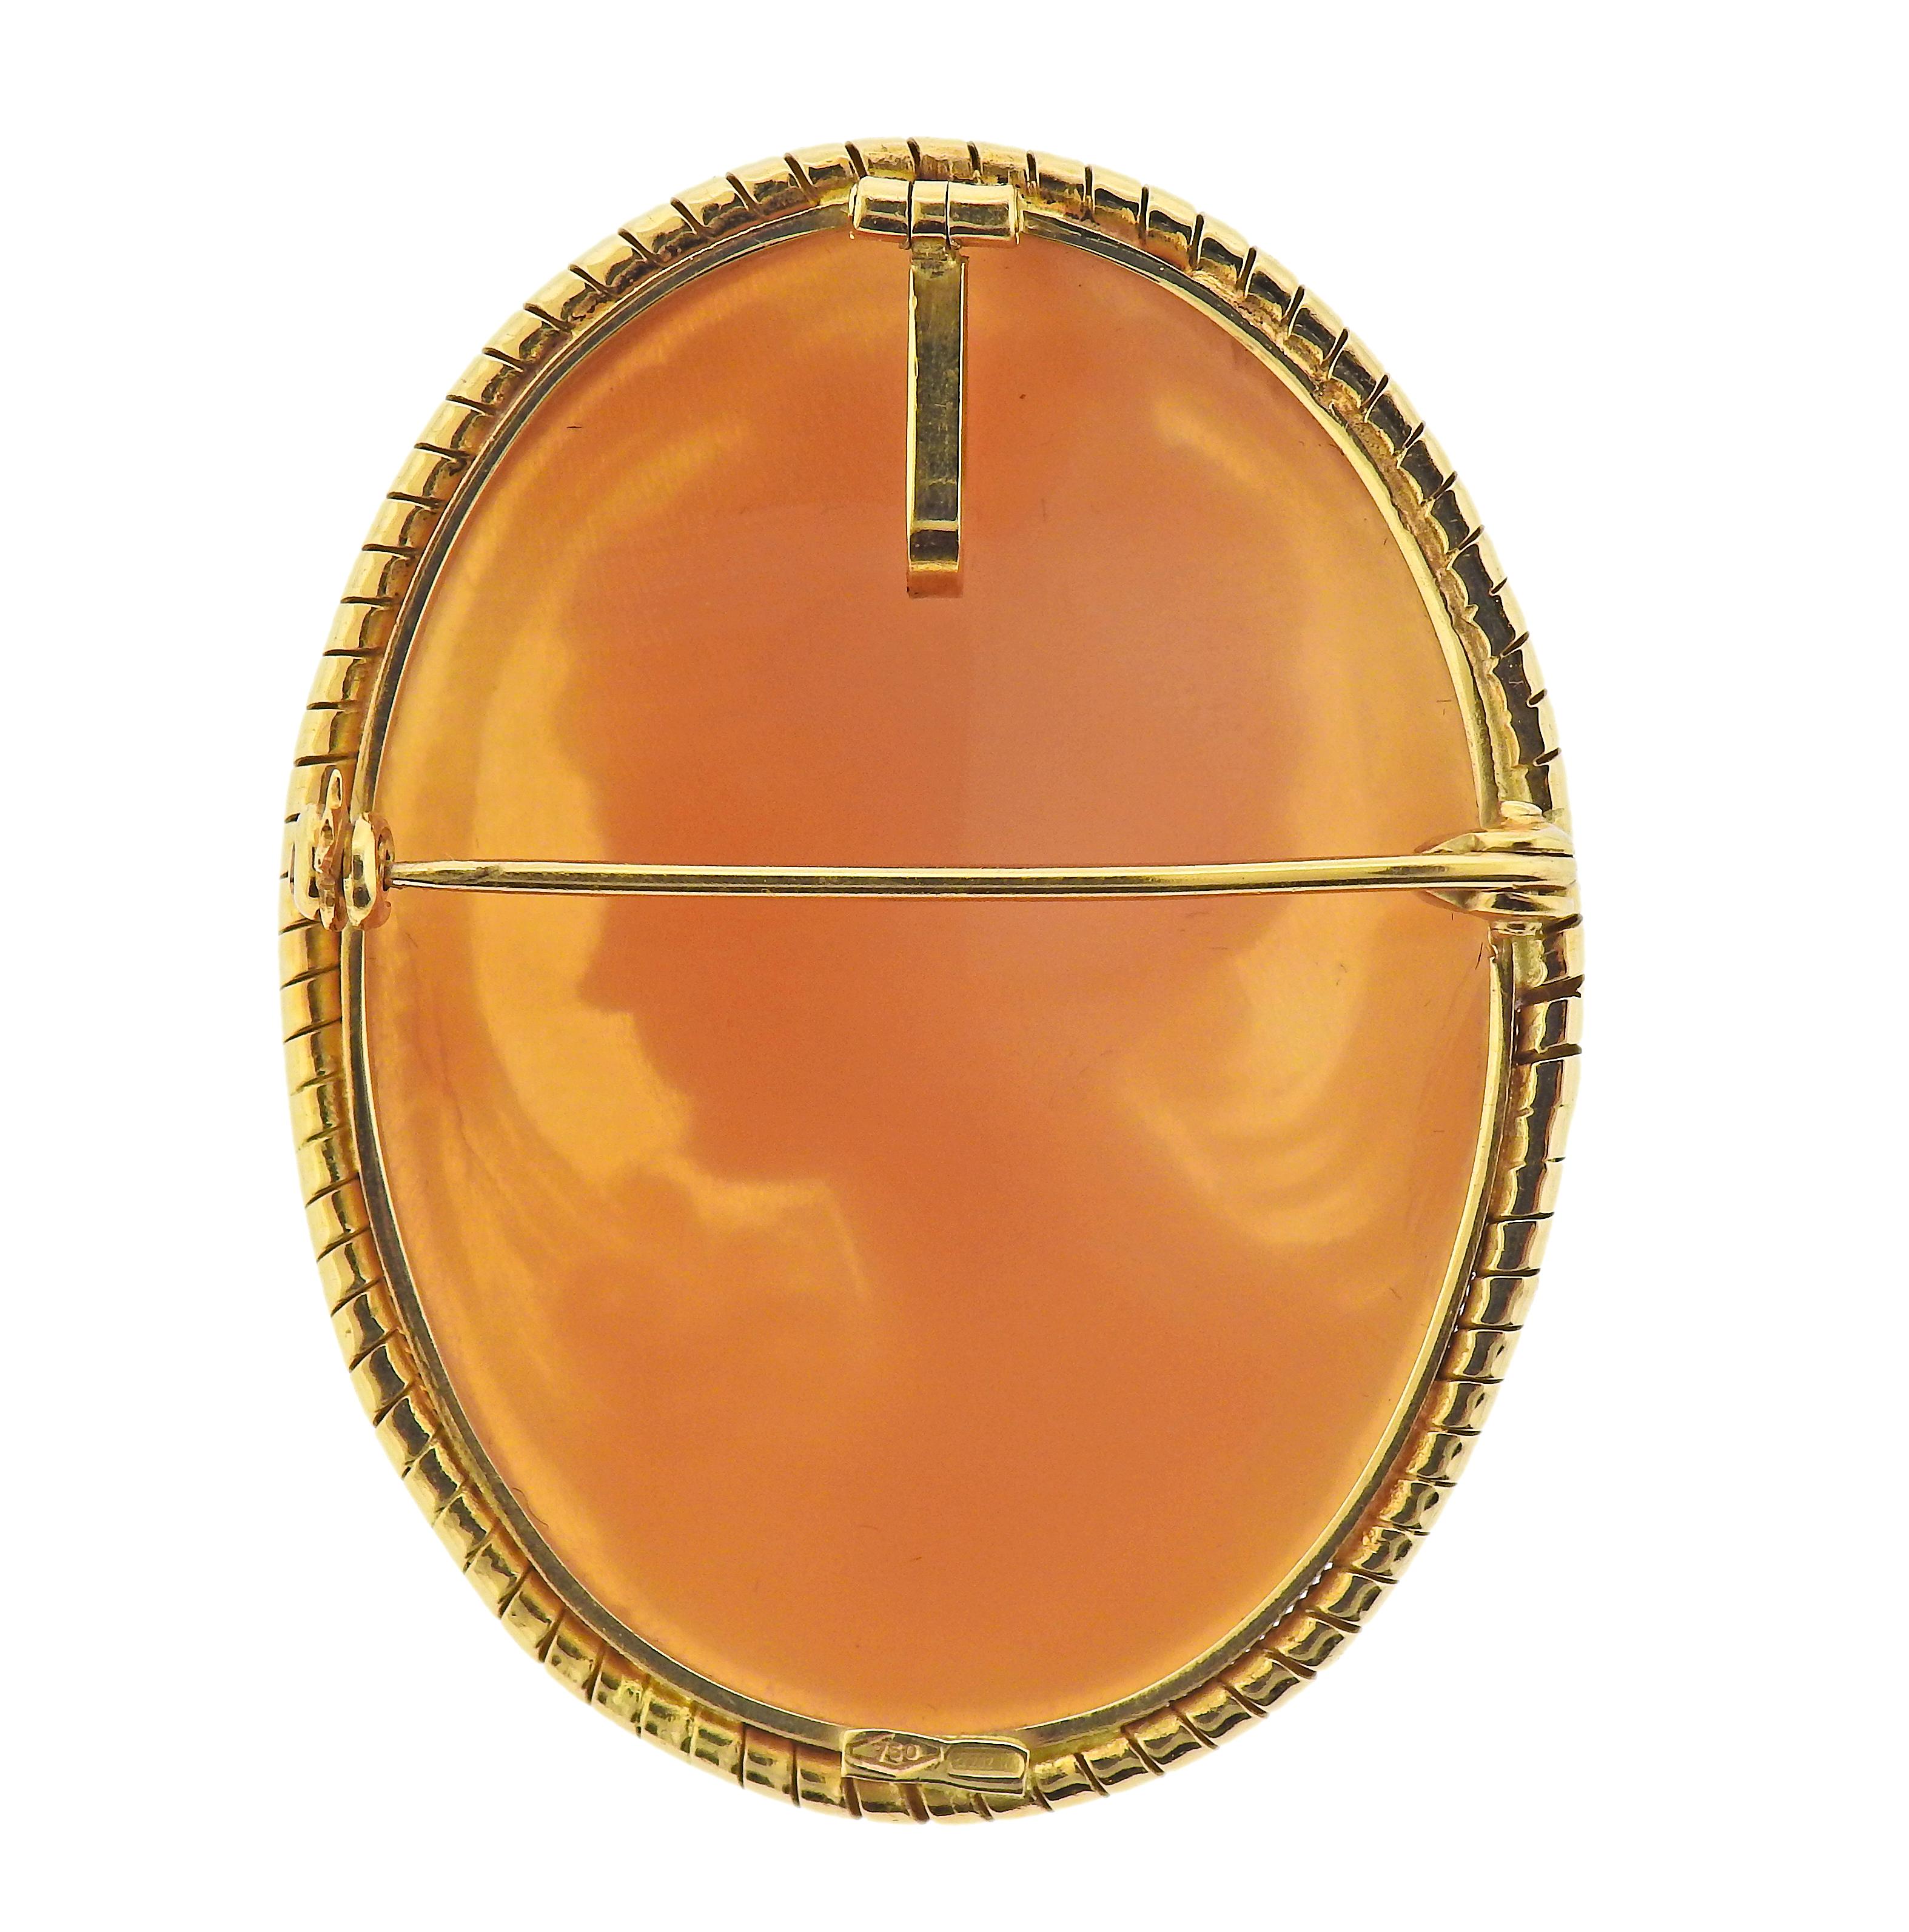 18k yellow gold pendant brooch, with shell cameo, depicting a lady's profile. Brooch is 45mm x 35mm. Marked 750. Weight - 12 grams. 